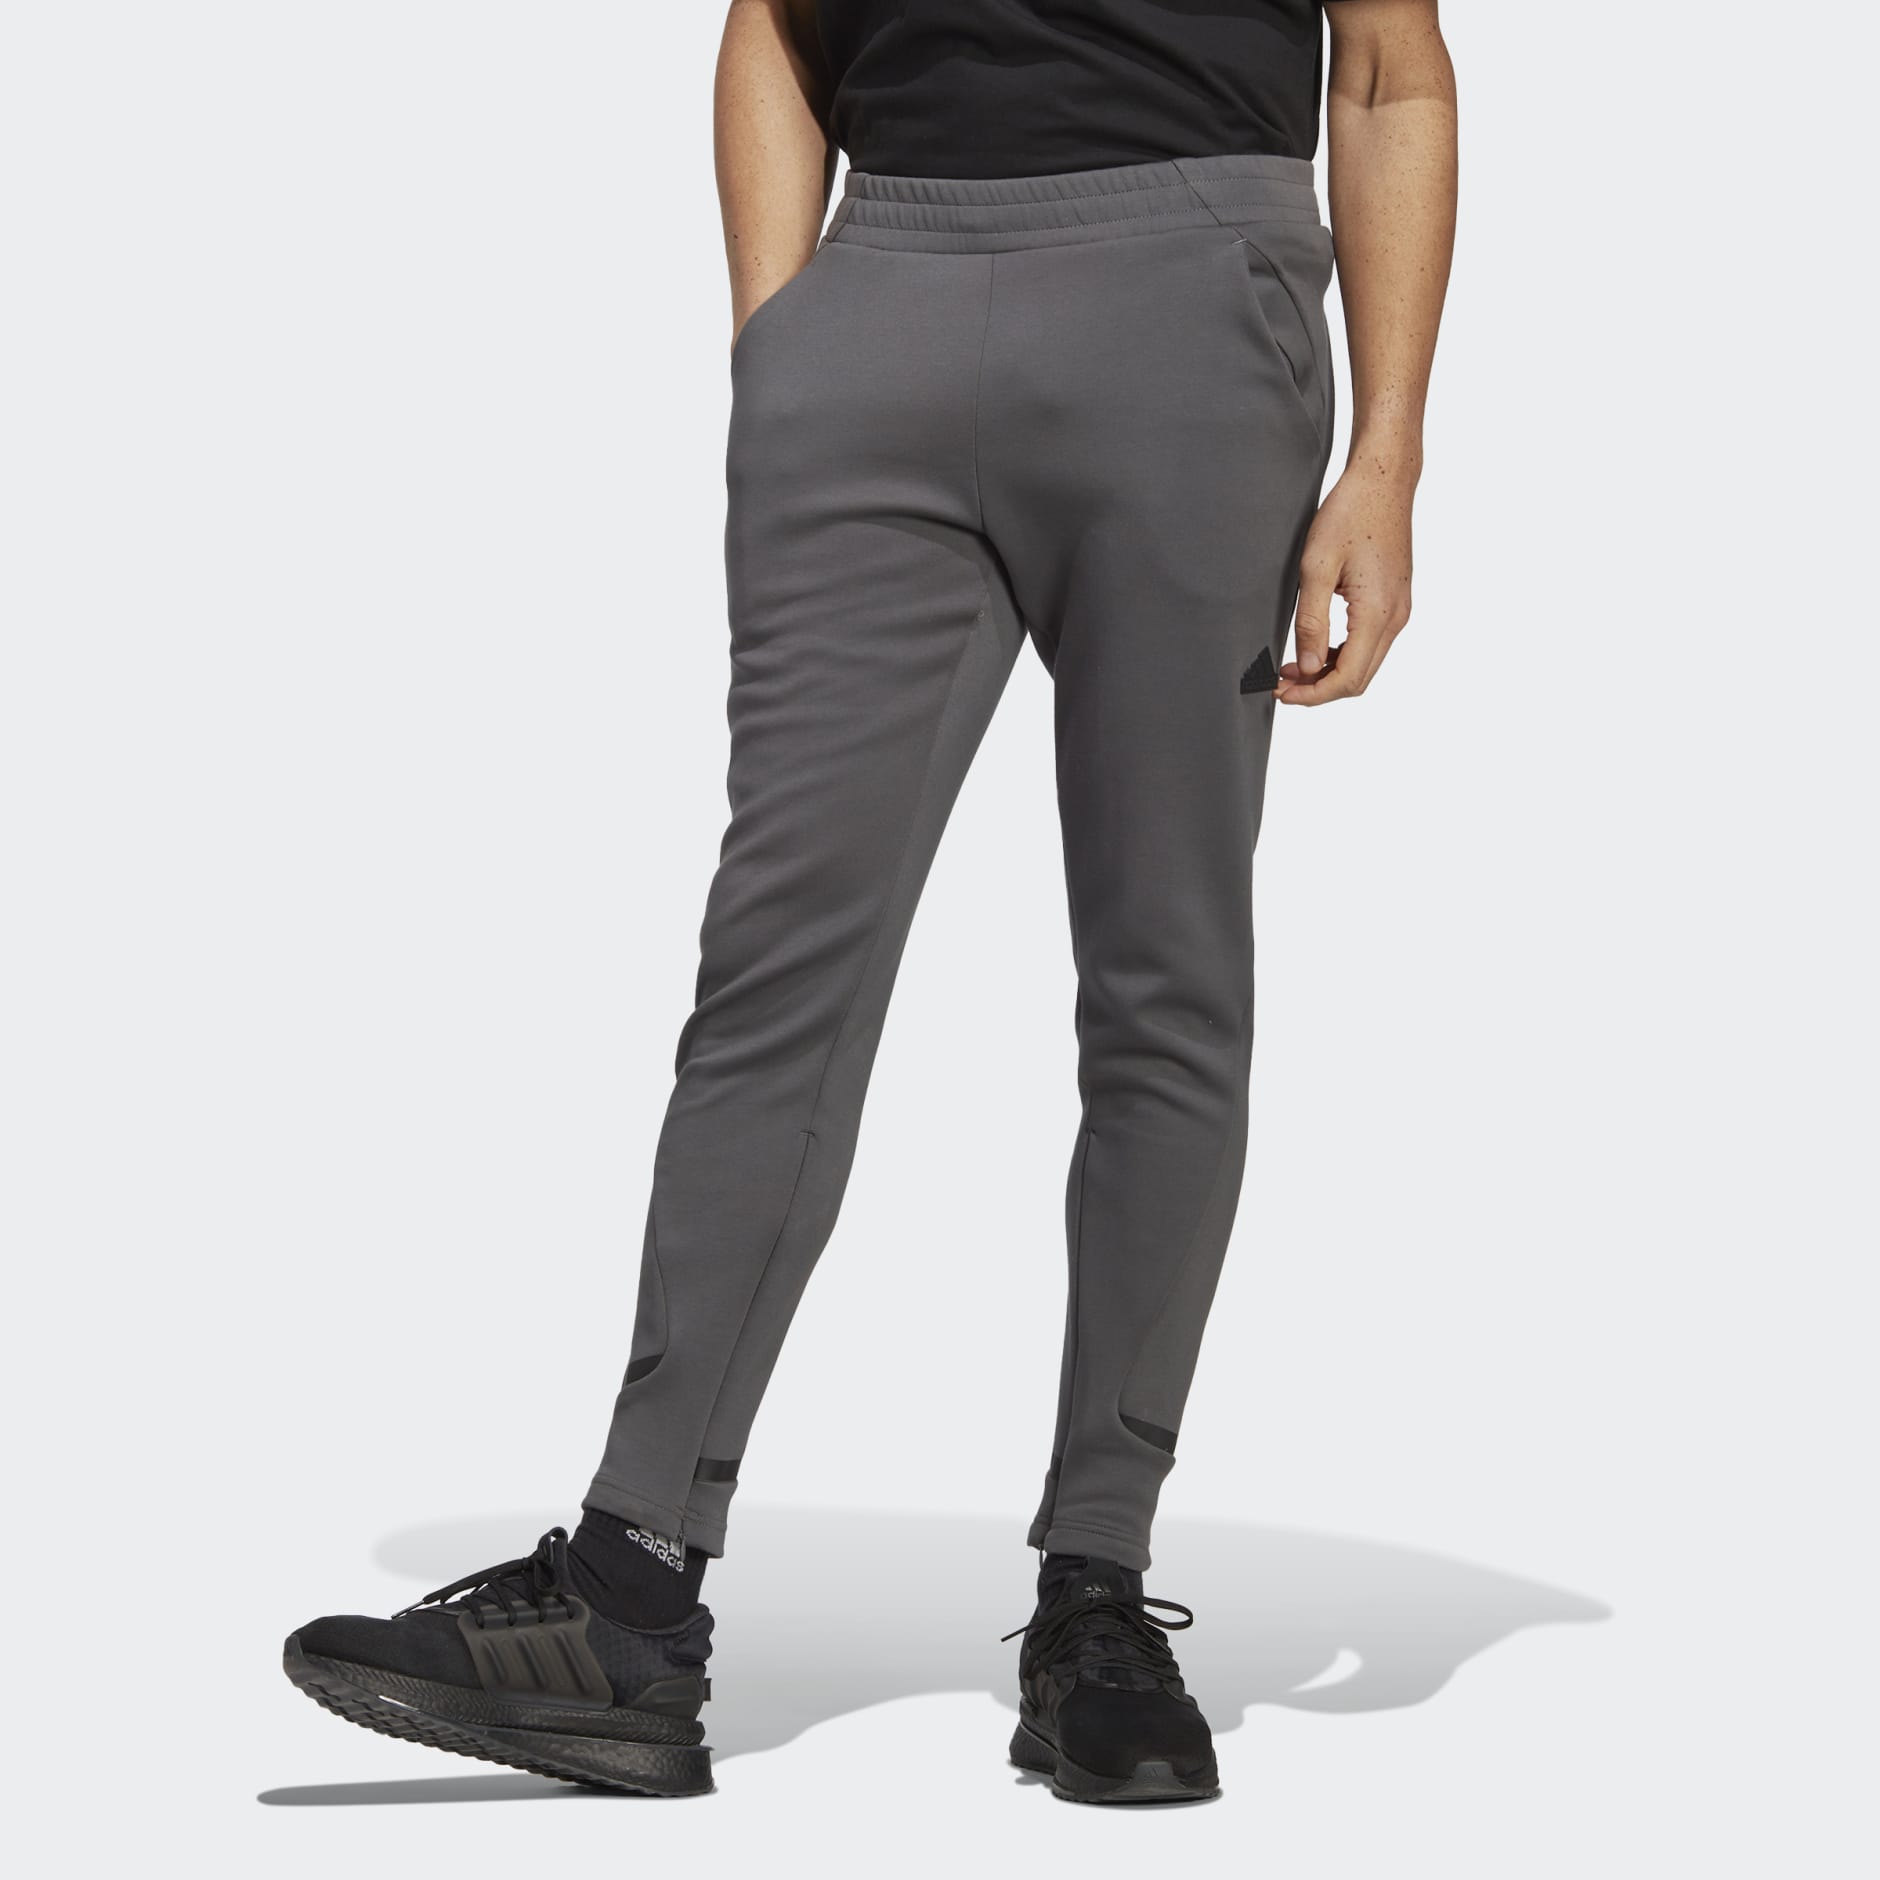 Clothing - Juventus Designed for Gameday Pants - Black | adidas South Africa